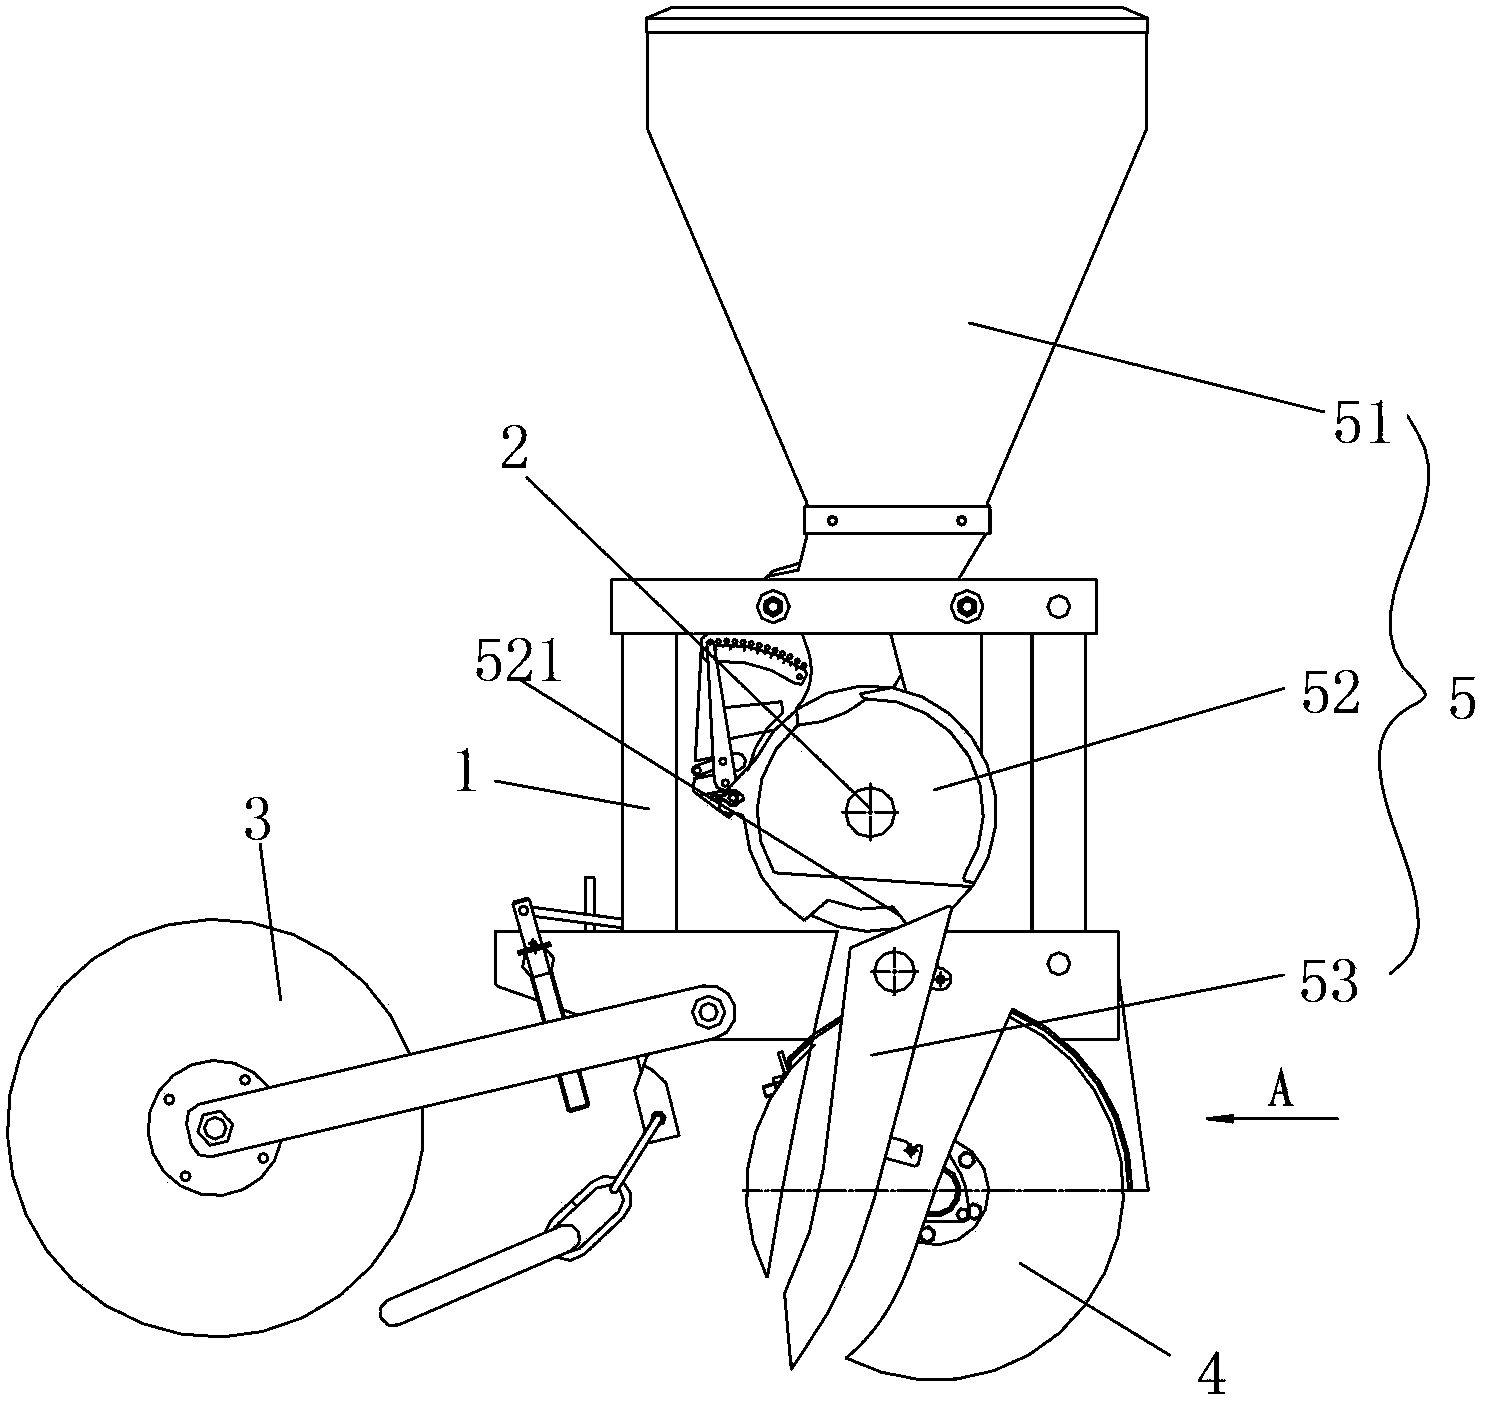 Seed guide device and seeding monomer with same